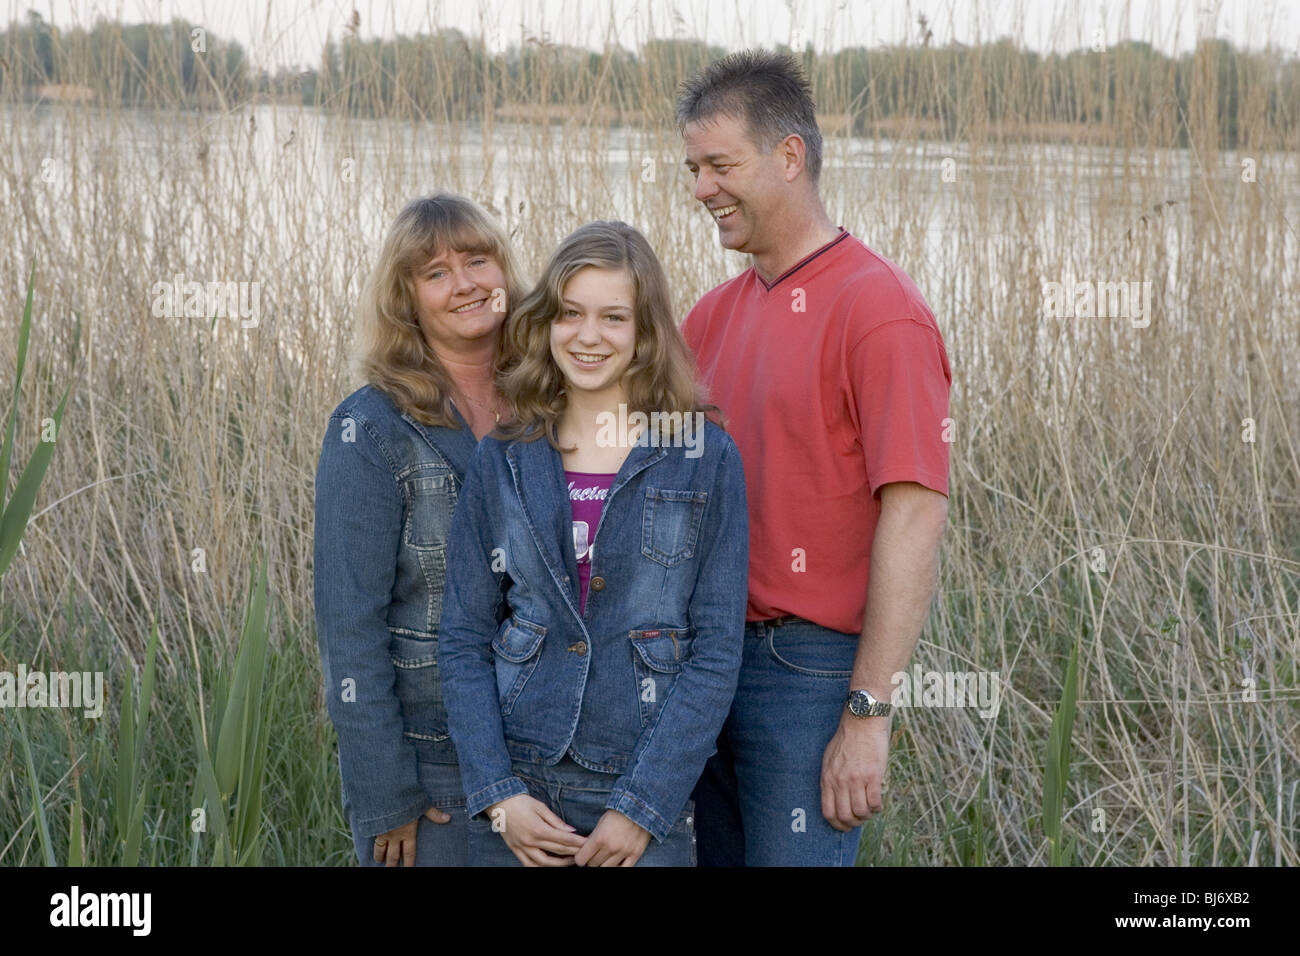 Happy family portrait outside in countryside. Stock Photo